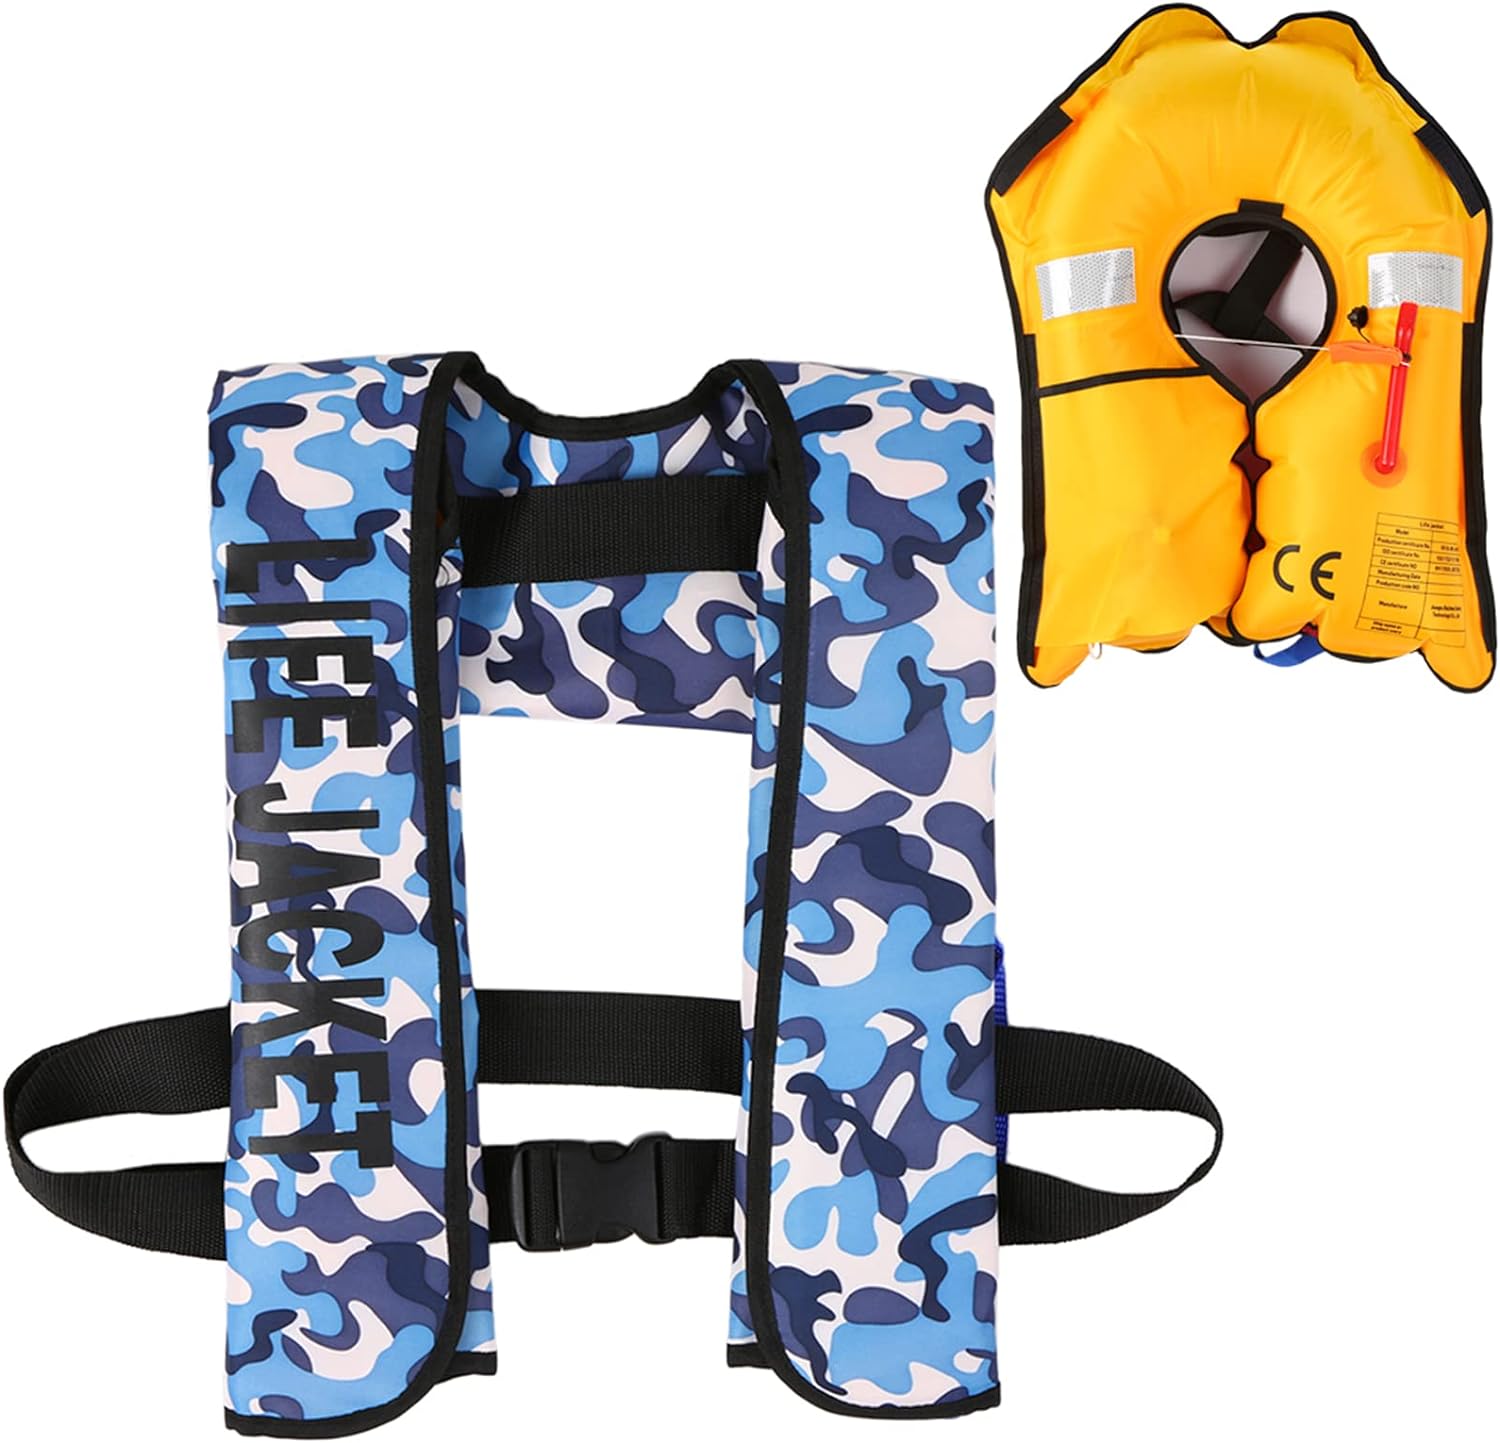 Adult Automatic Water Sports Vest for Boating Fishing Kayaking Paddling - Adult Water Sports Vest Review